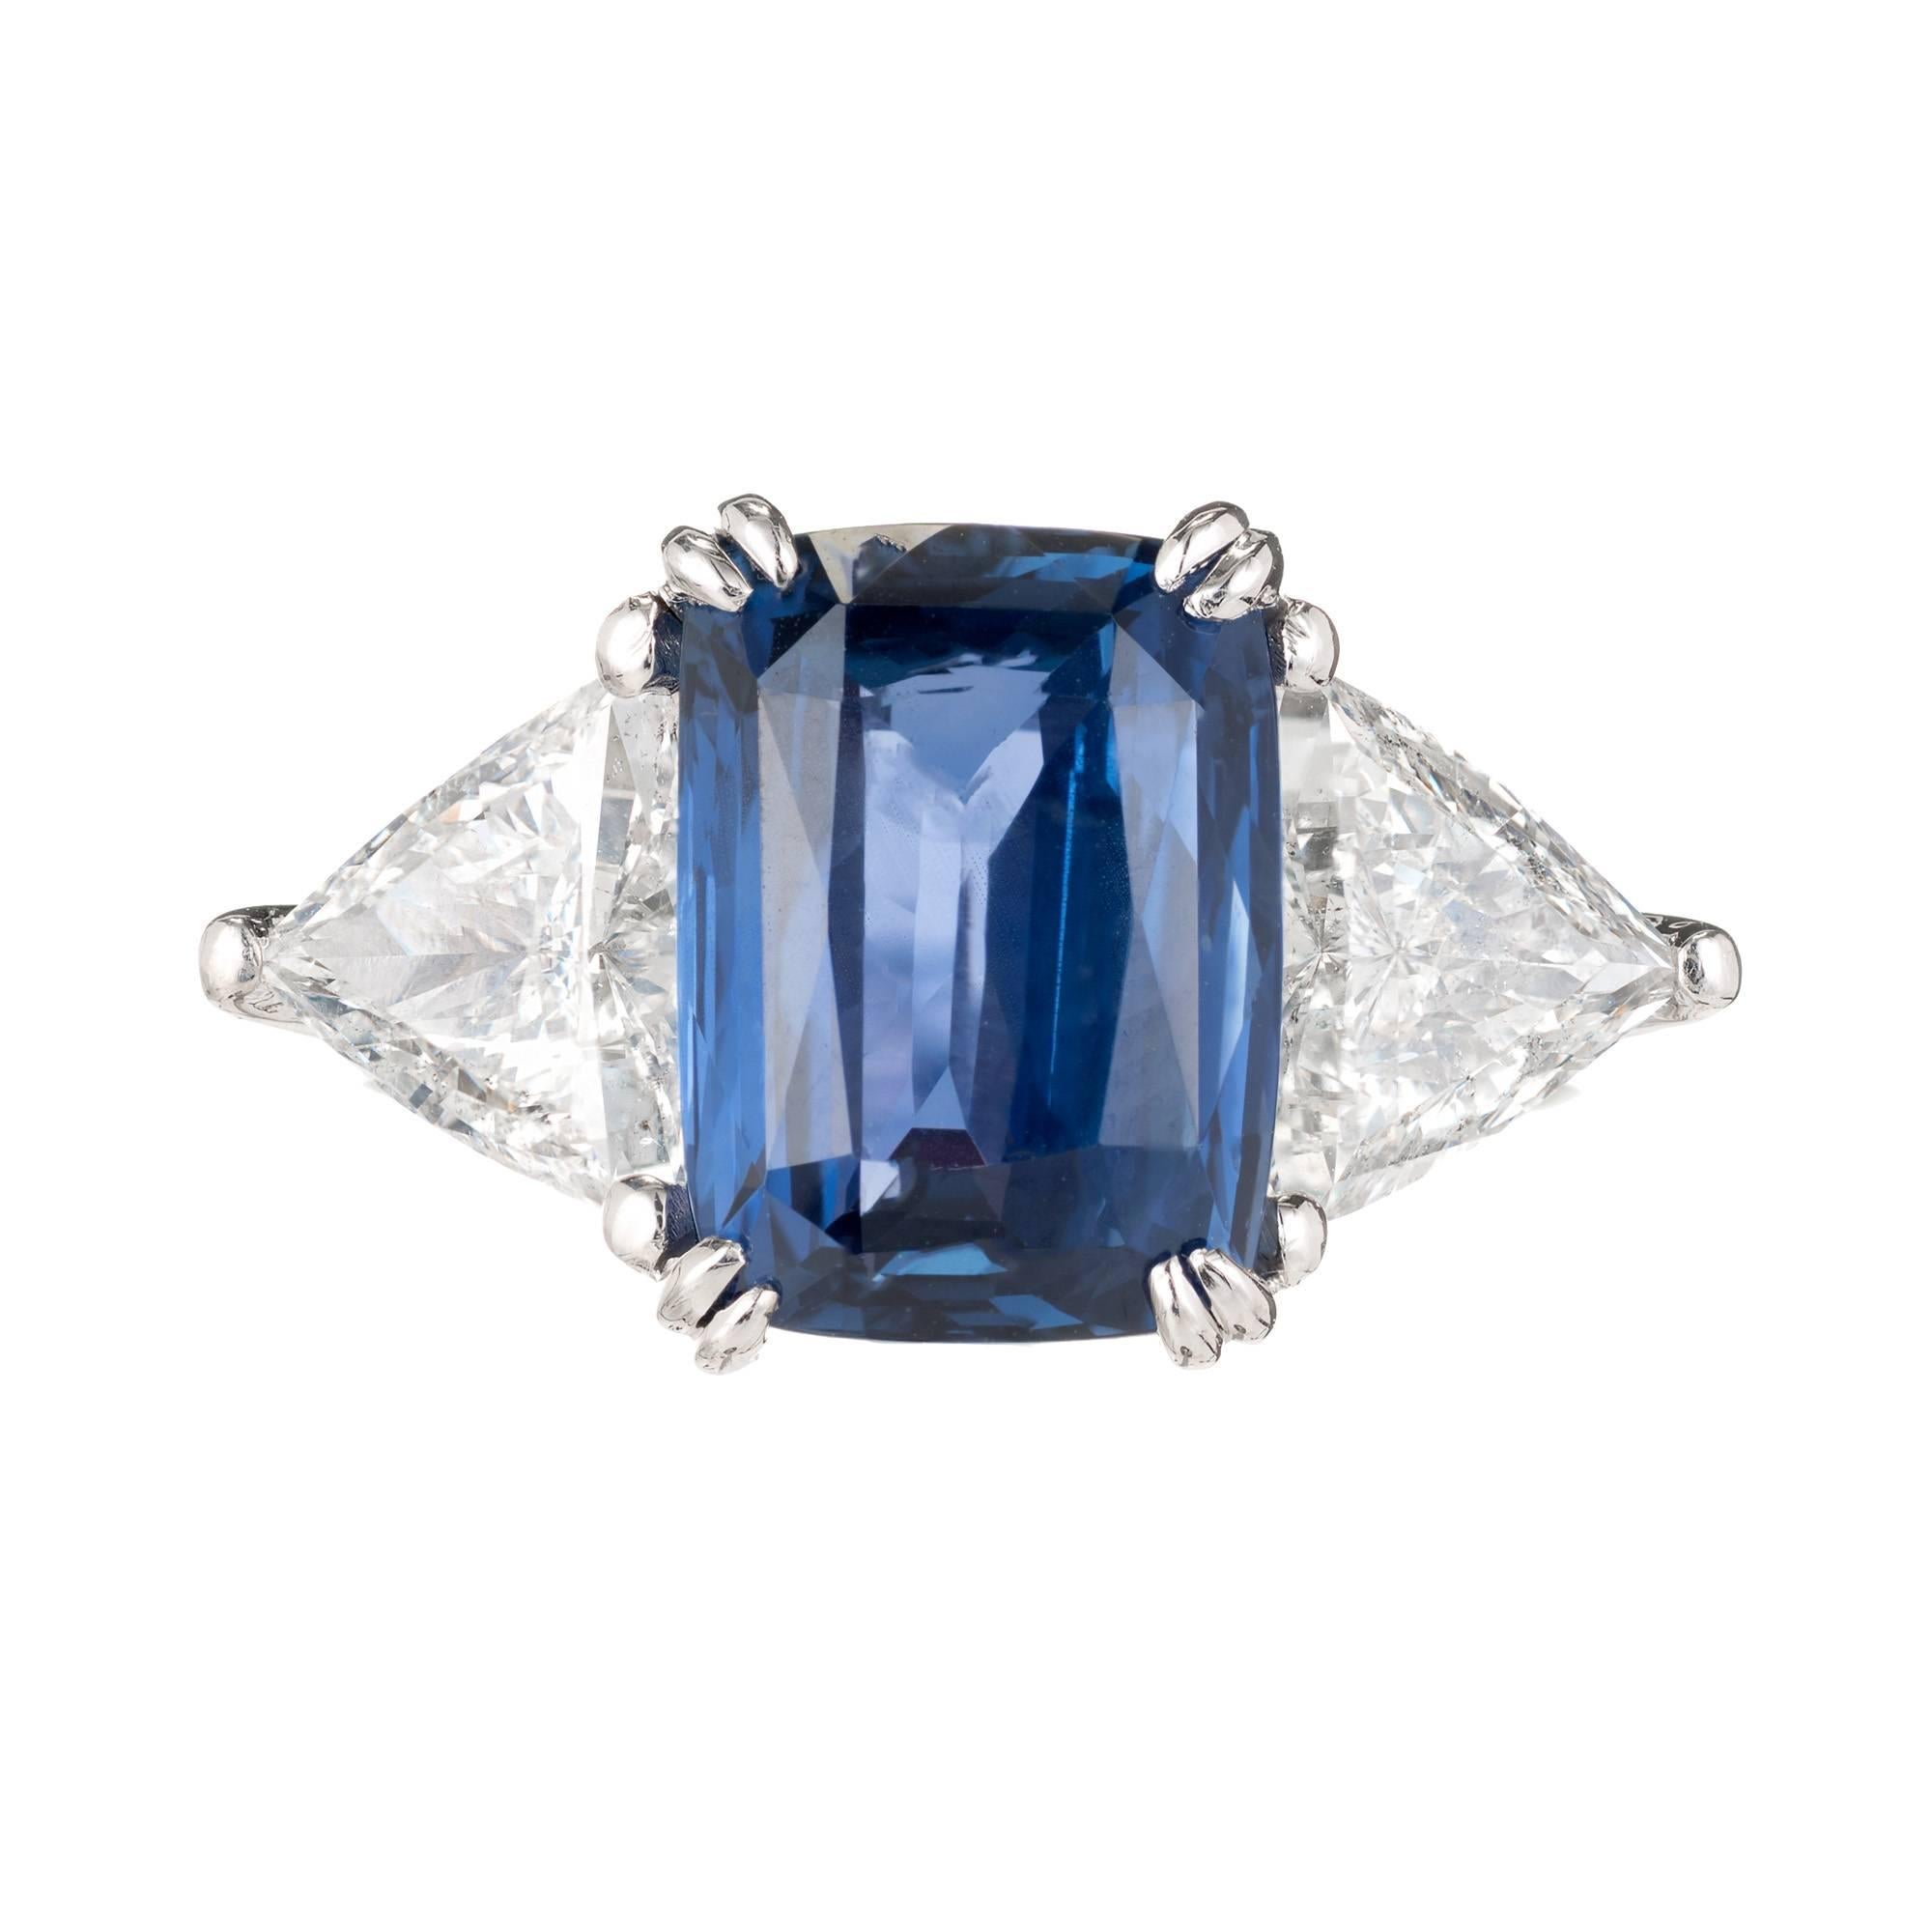 Peter Suchy cushion cut rectangle Sapphire and diamond three-stone engagement ring. GIA certified sapphire all-natural no heat and no enhancements with 2 trilliant cut side diamonds in a platinum setting. The ring was designed and made in the Peter